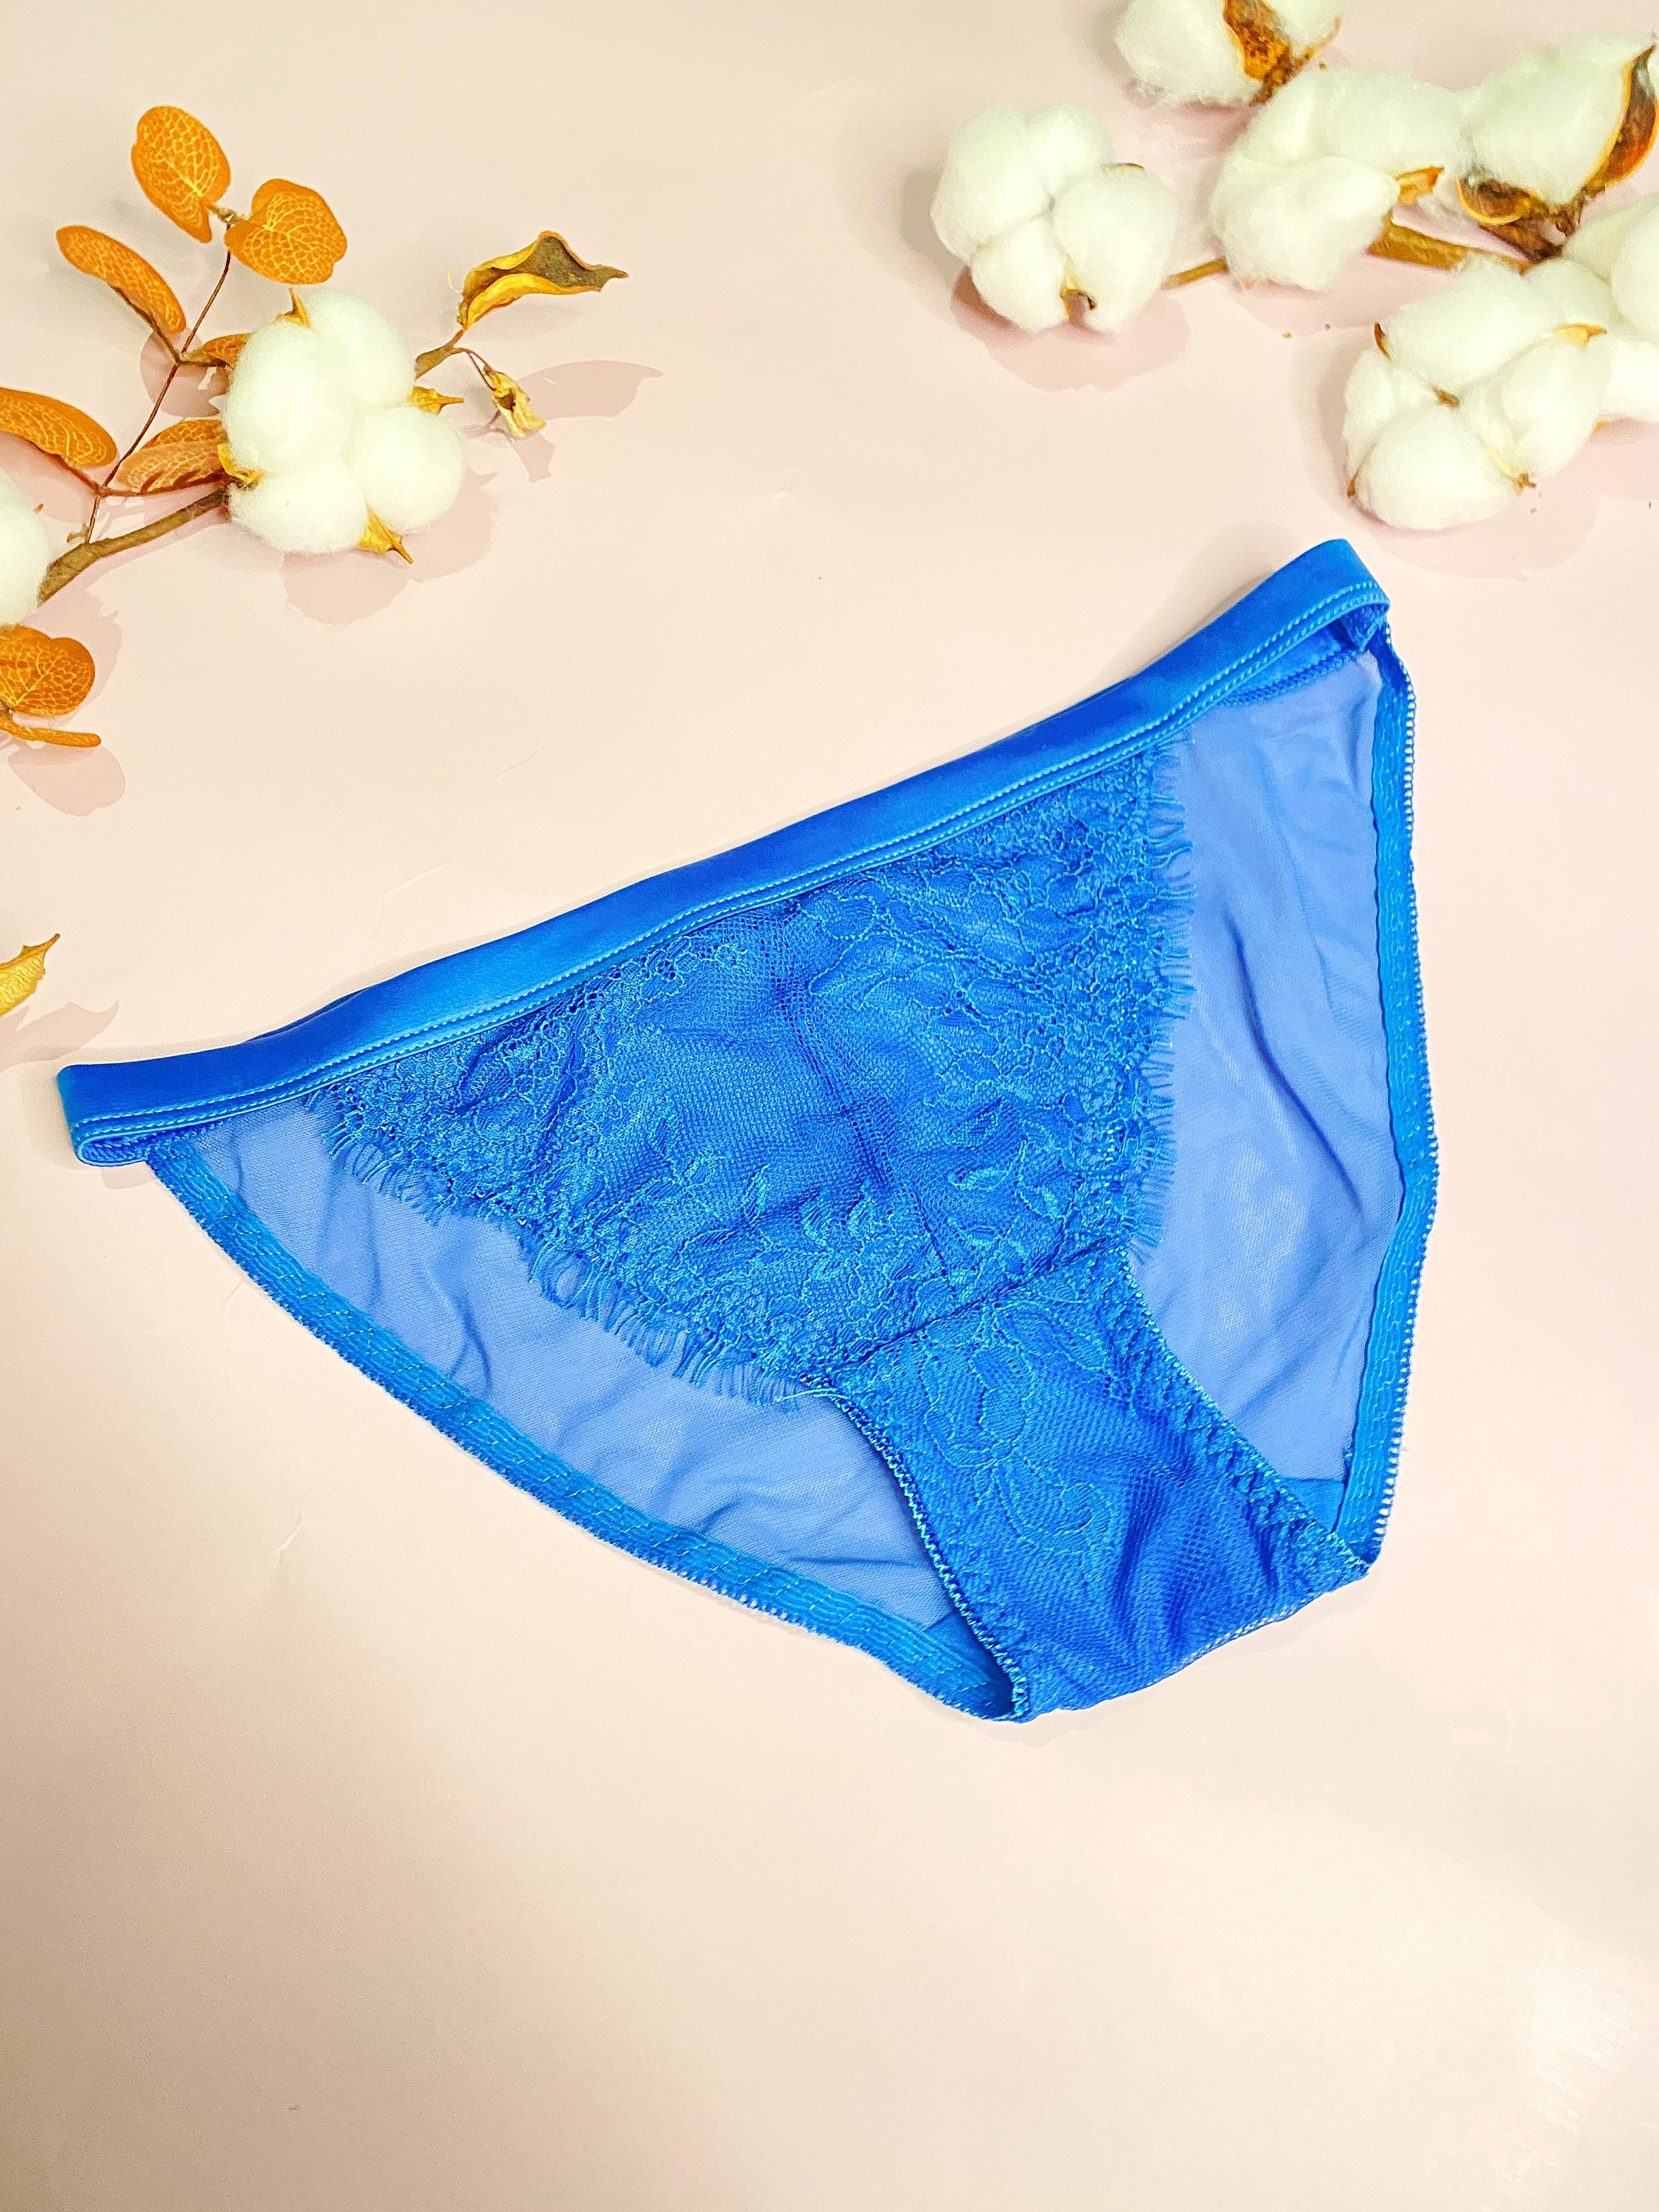 Blue Deva Brief Panty With Sheer back And Lace Detailing / | Etsy